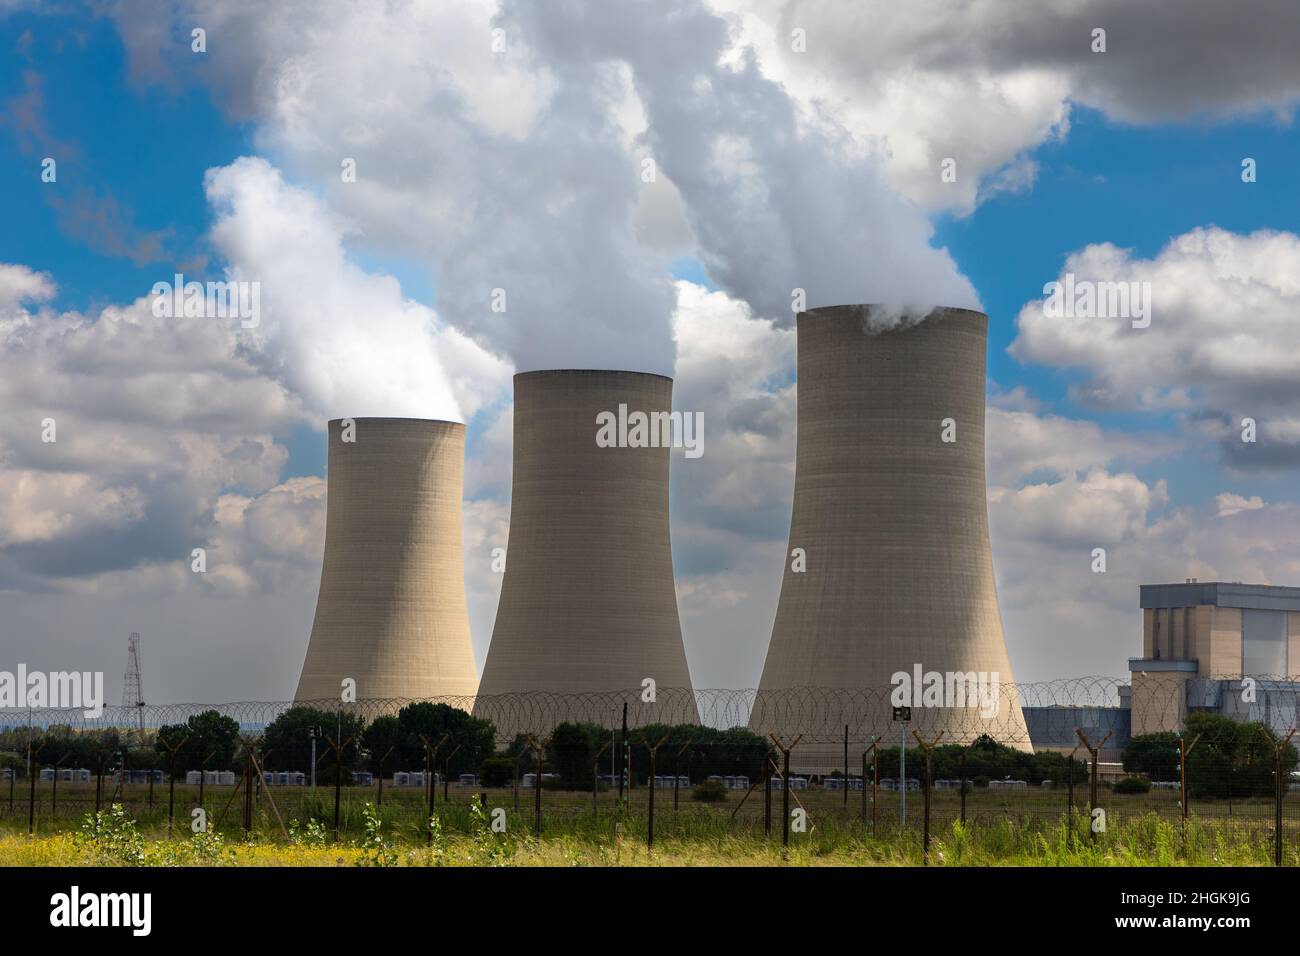 Cooling towers of a Coal fired power station in South Africa Stock Photo